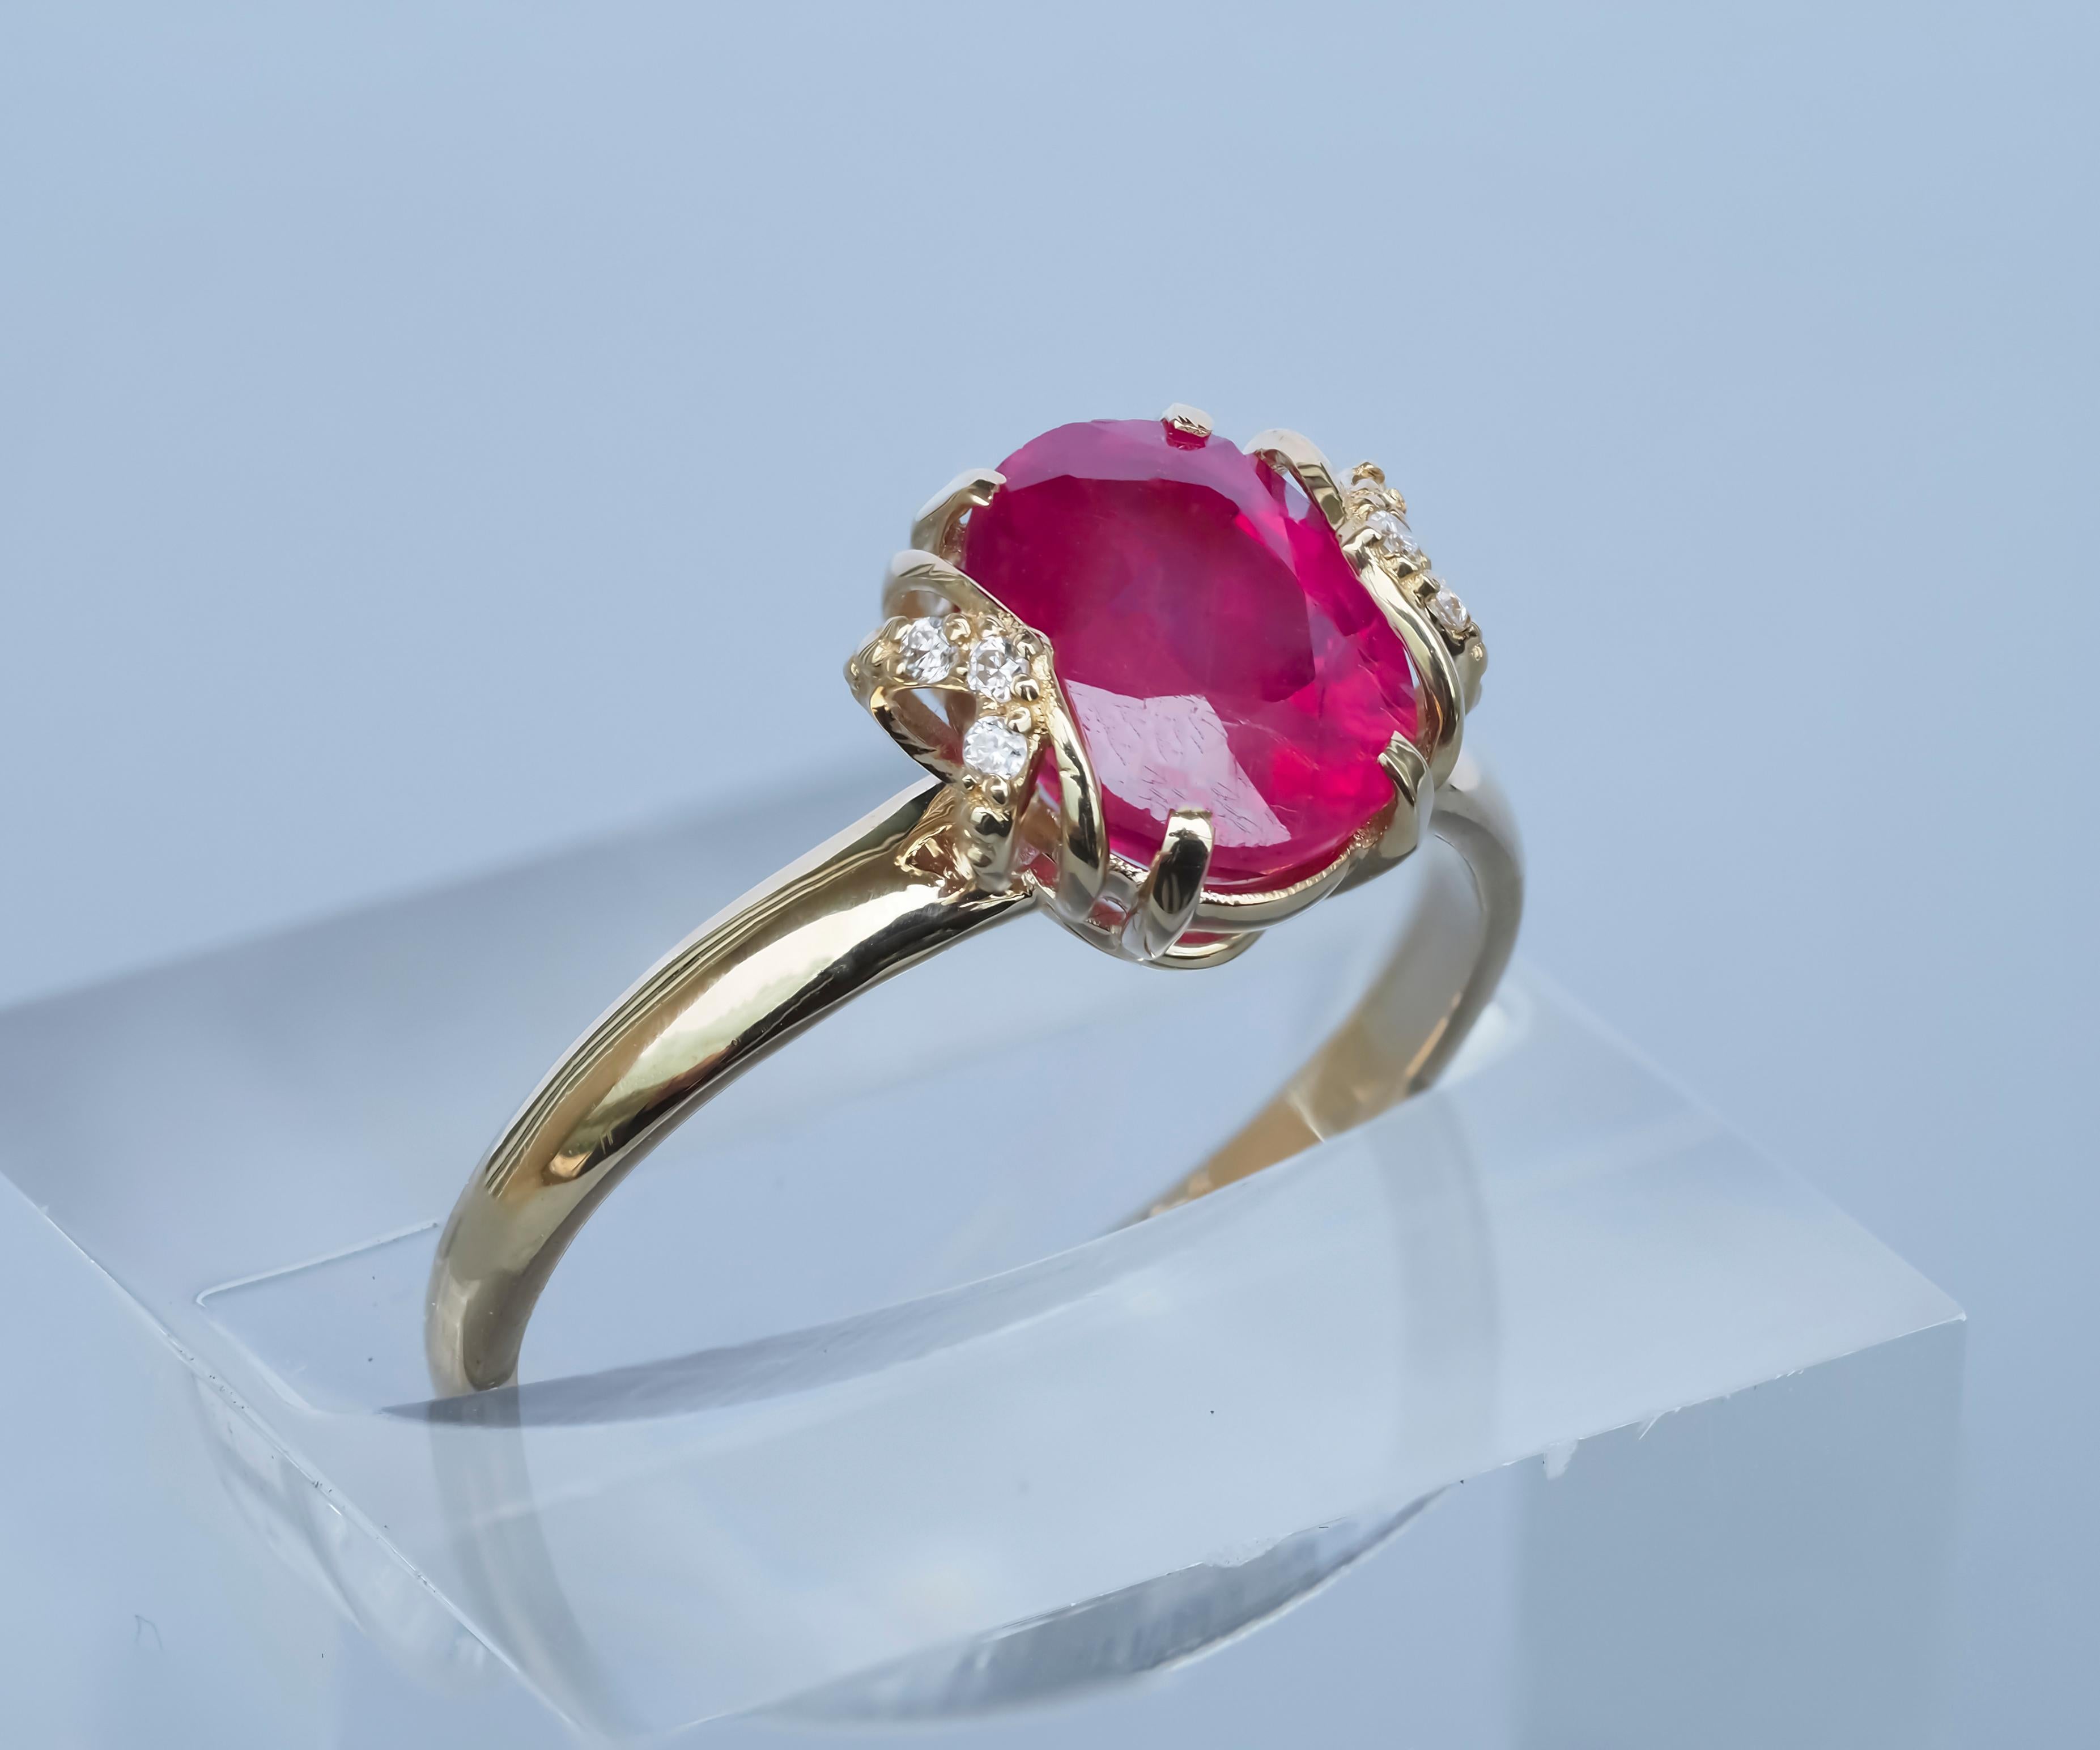 For Sale:  14 Karat Gold Ring with Ruby and Diamonds. Oval ruby ring! 6